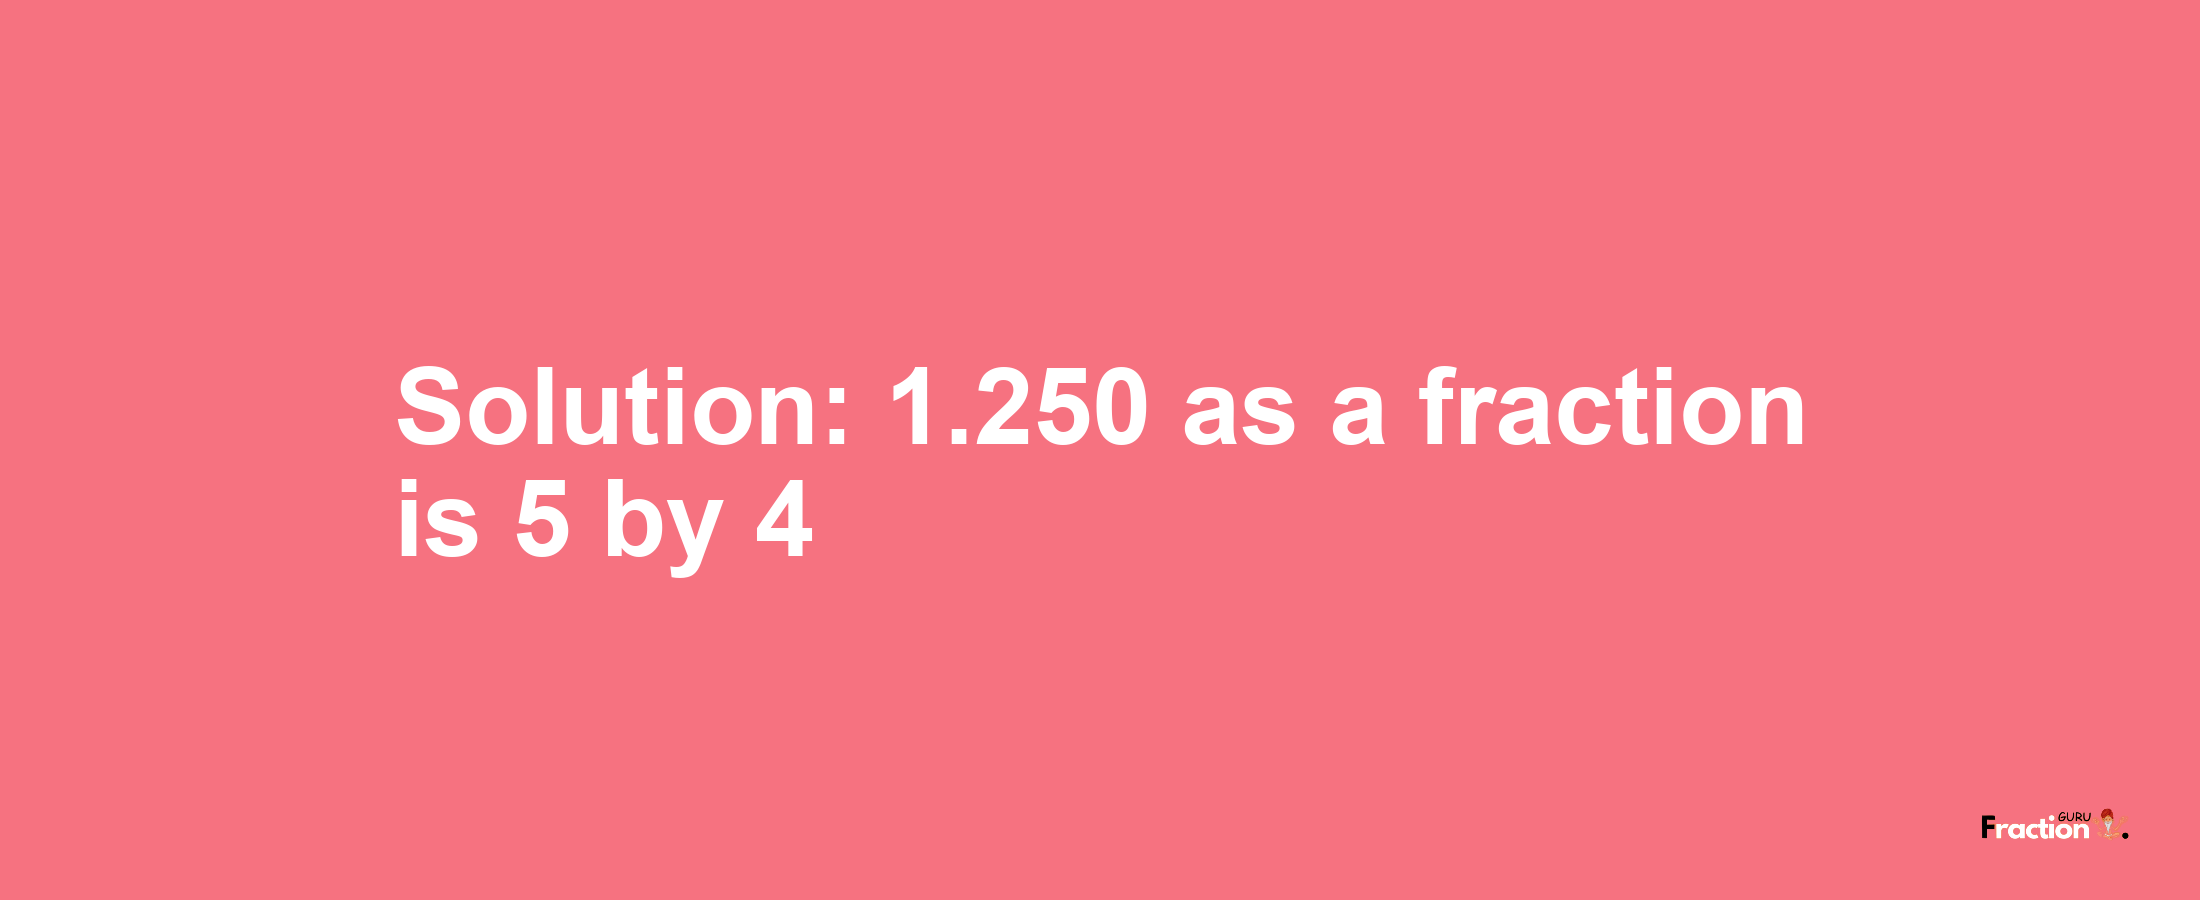 Solution:1.250 as a fraction is 5/4